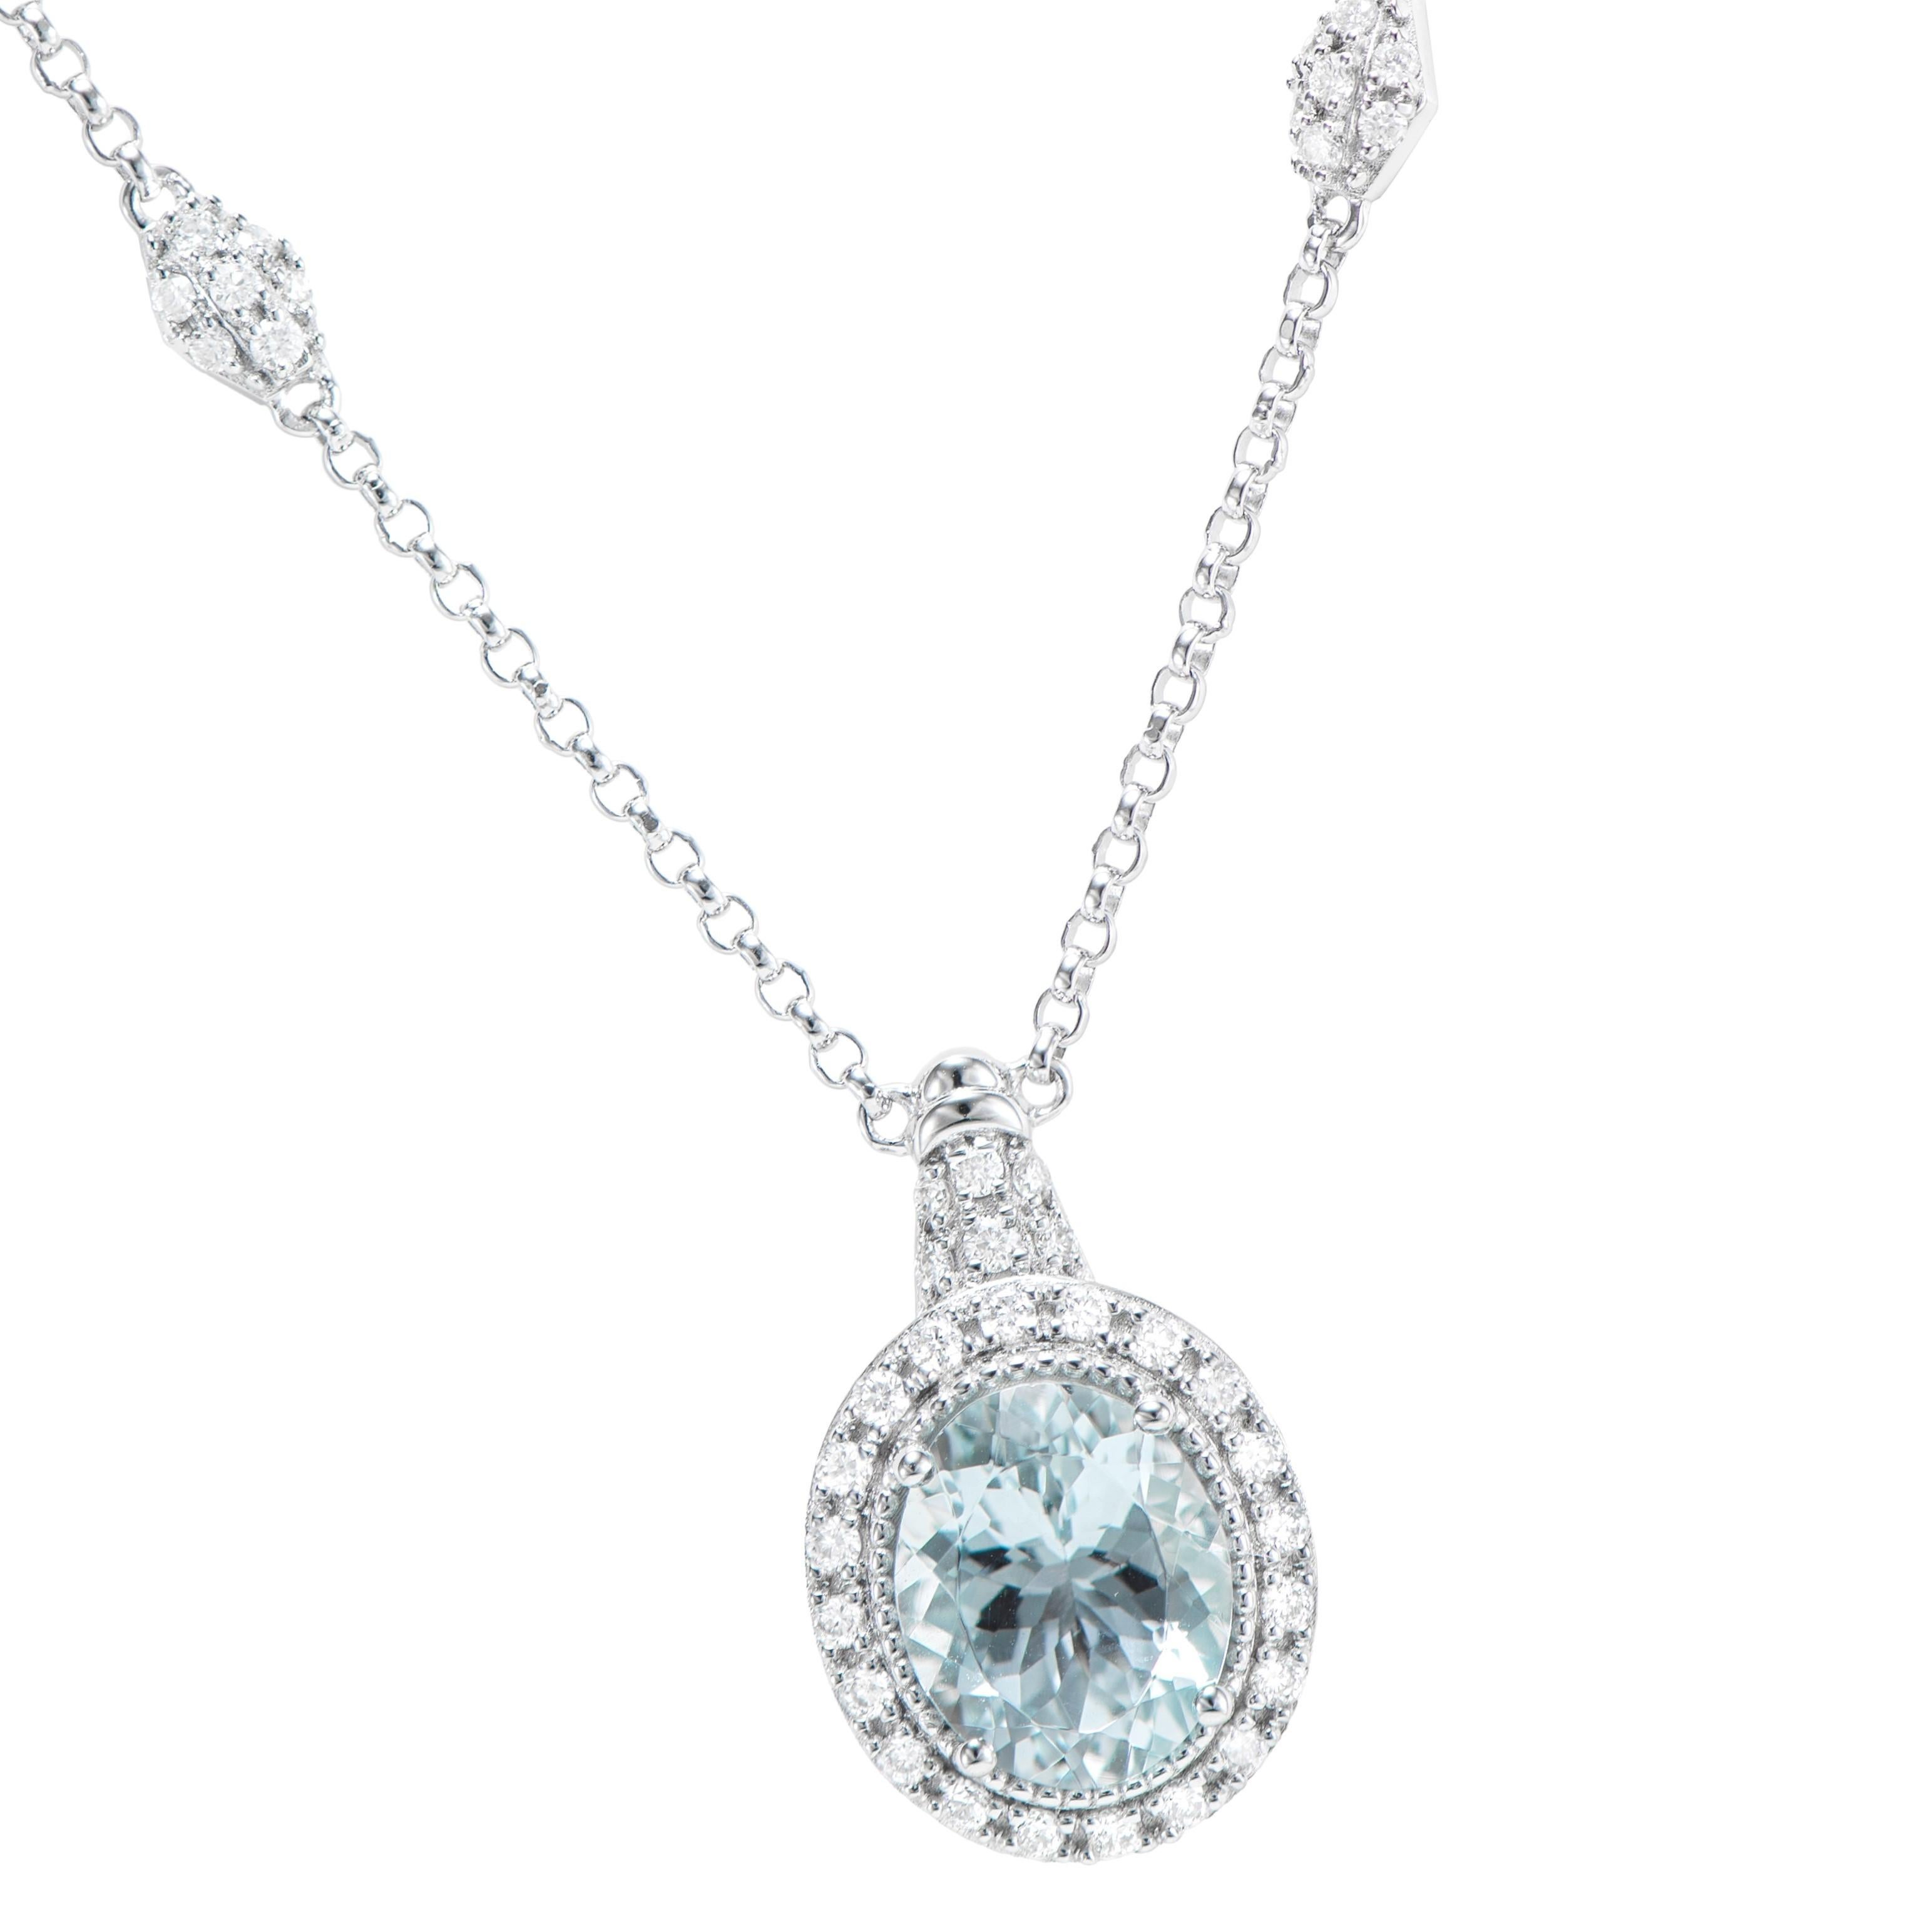 This collection features an array of aquamarines with an icy blue hue that is as cool as it gets! Accented with diamonds these Pendants are made in white gold and present a classic yet elegant look. 

Aquamarine and White Diamond Pendant in 18 Karat